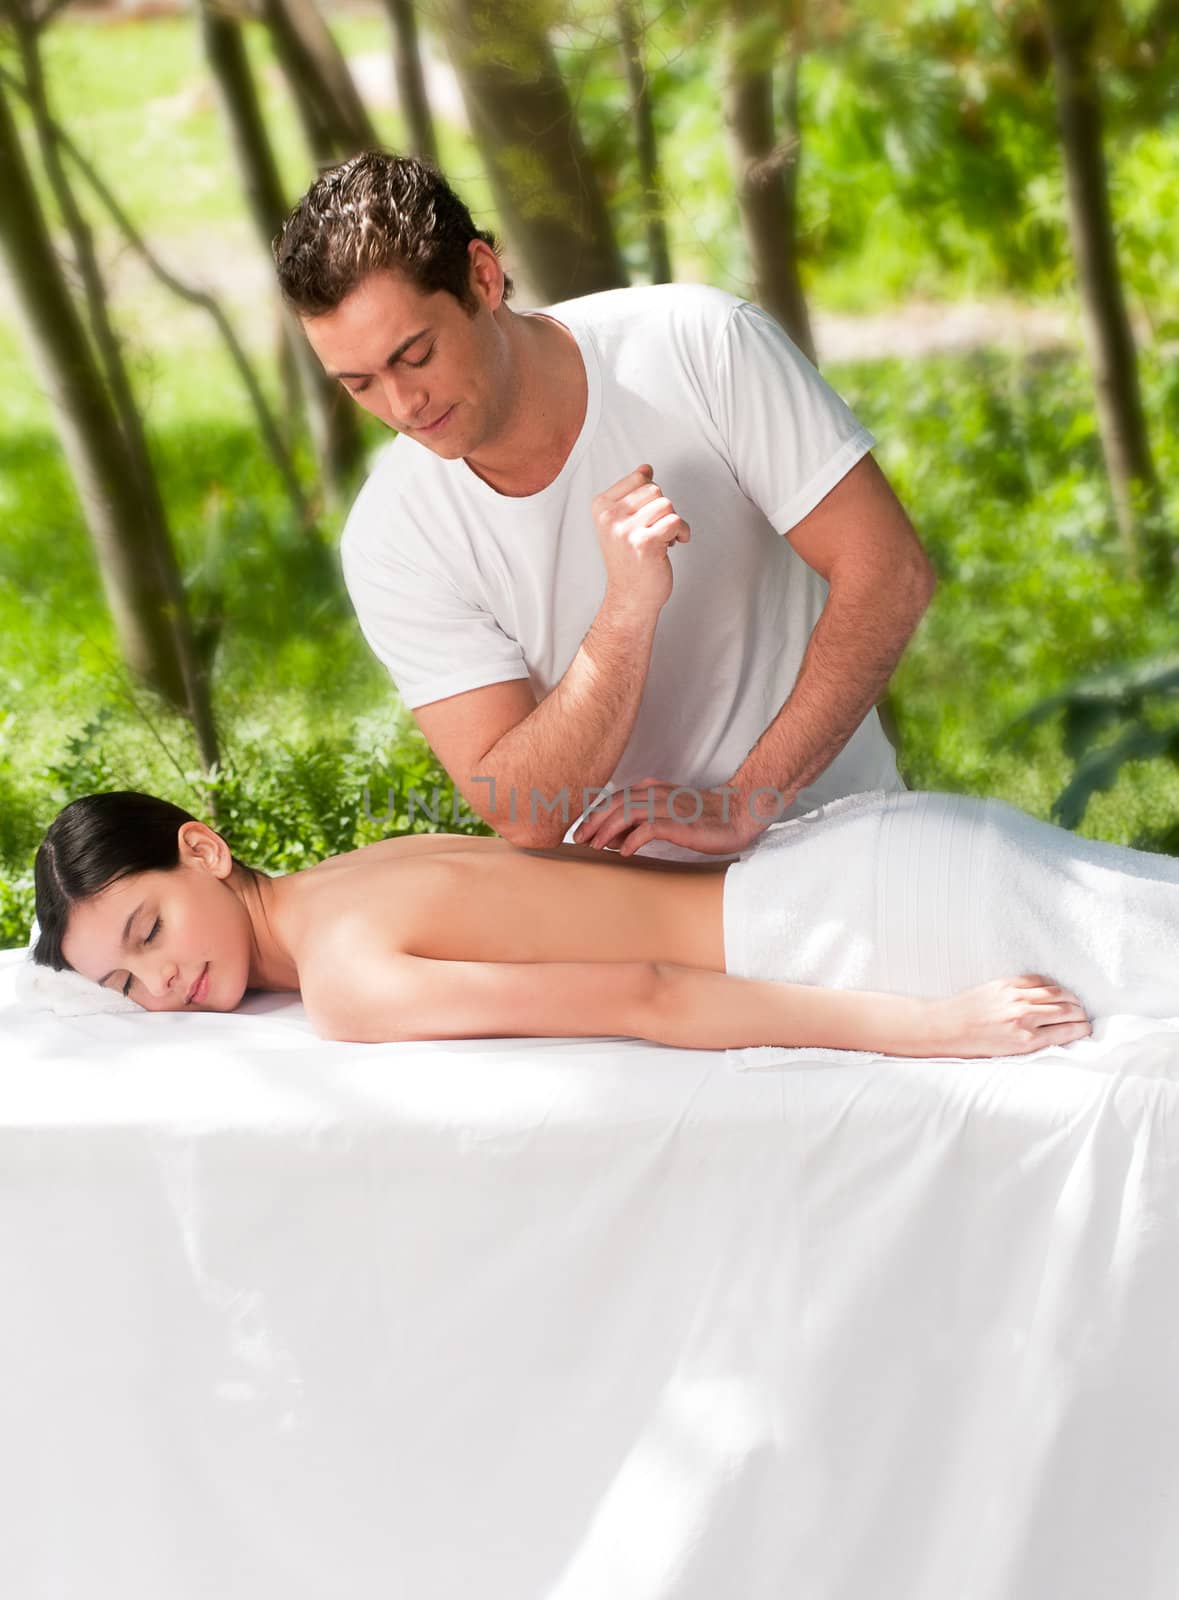 A male masseur giving a massage to a woman outdoors